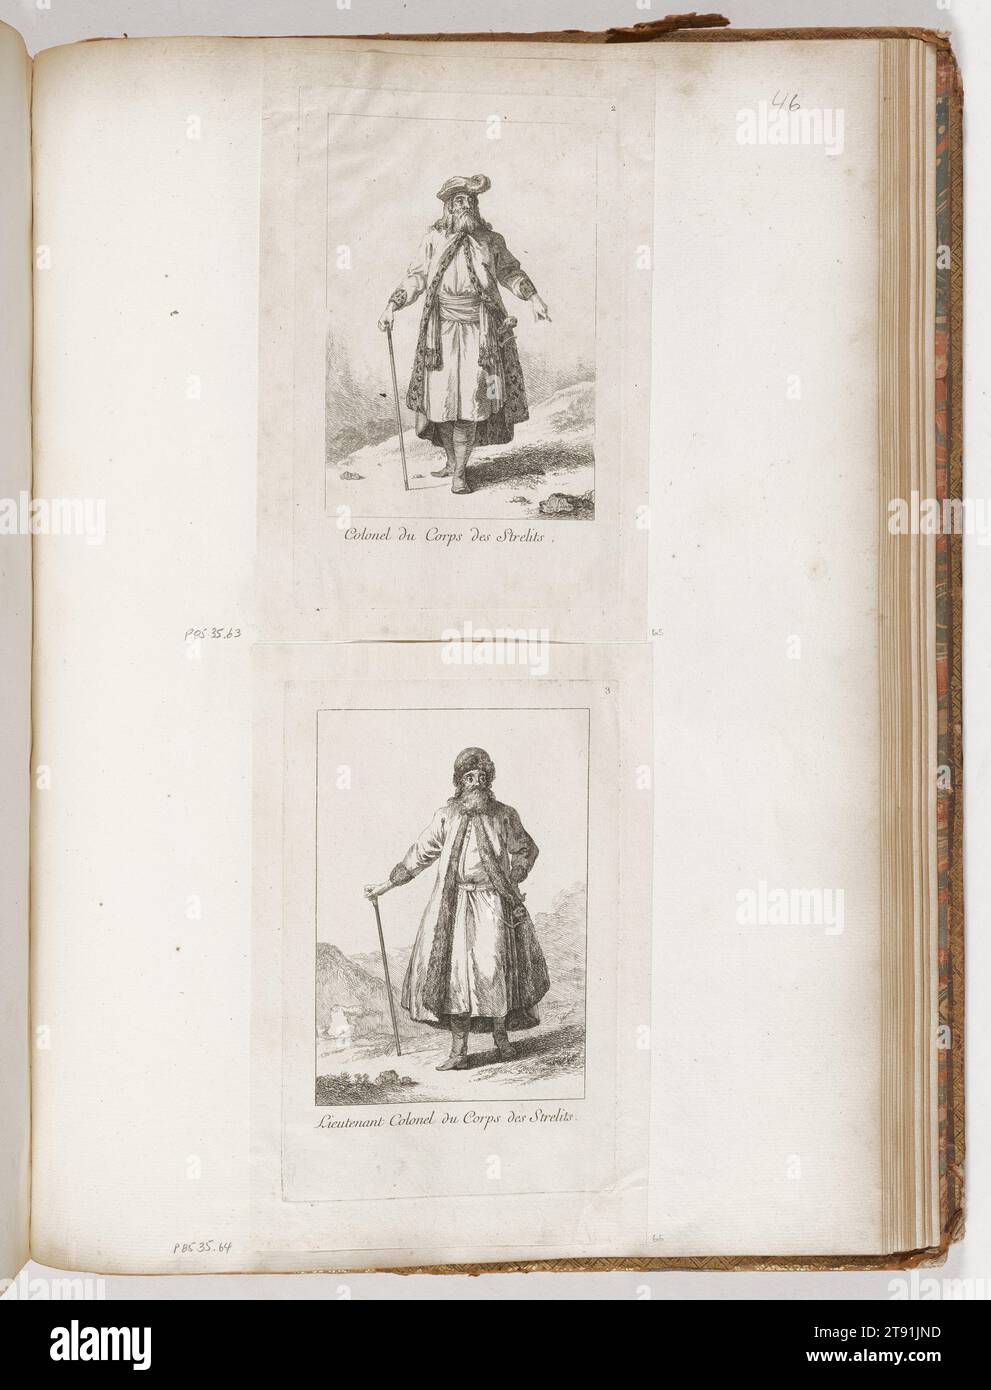 Colonel from the Streltsi Militia, 1764, Jean-Baptiste Le Prince, French, 1734 - 1781, 6 15/16 x 4 11/16 in. (17.62 x 11.91 cm) (image)9 x 5 3/4 in. (22.86 x 14.61 cm) (plate)10 3/16 x 6 13/16 in. (25.88 x 17.3 cm) (sheet), Etching, France, 18th century Stock Photo